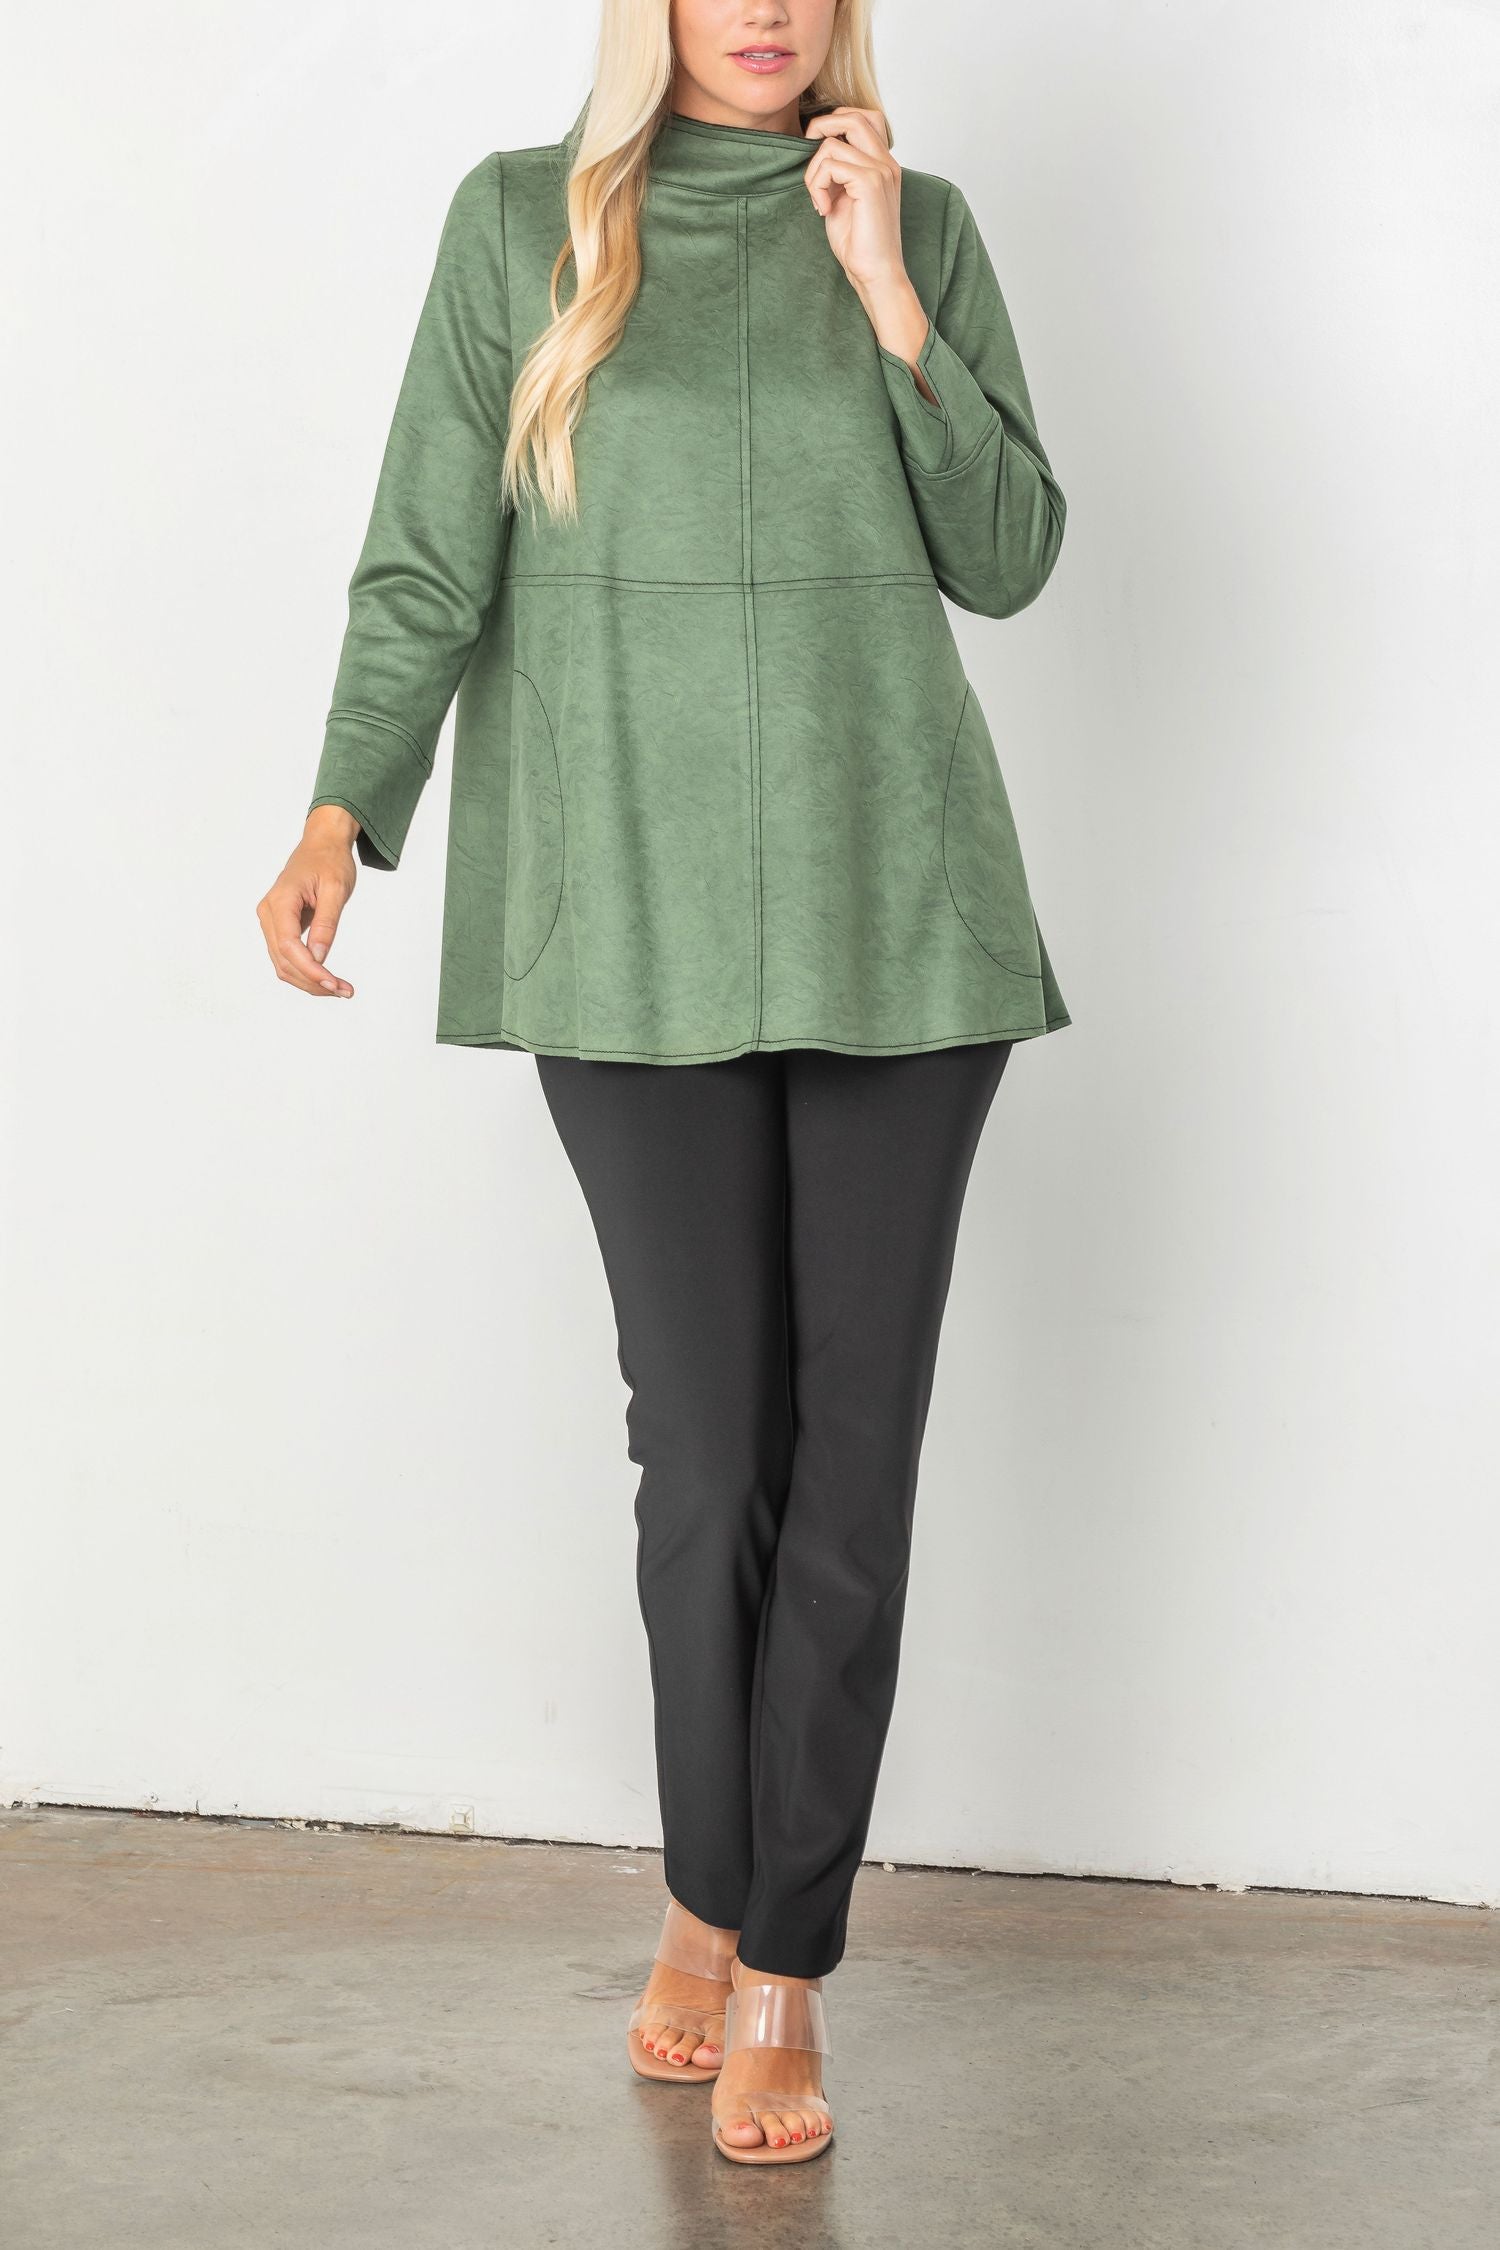 Green High Neck Contrast Stitching Top